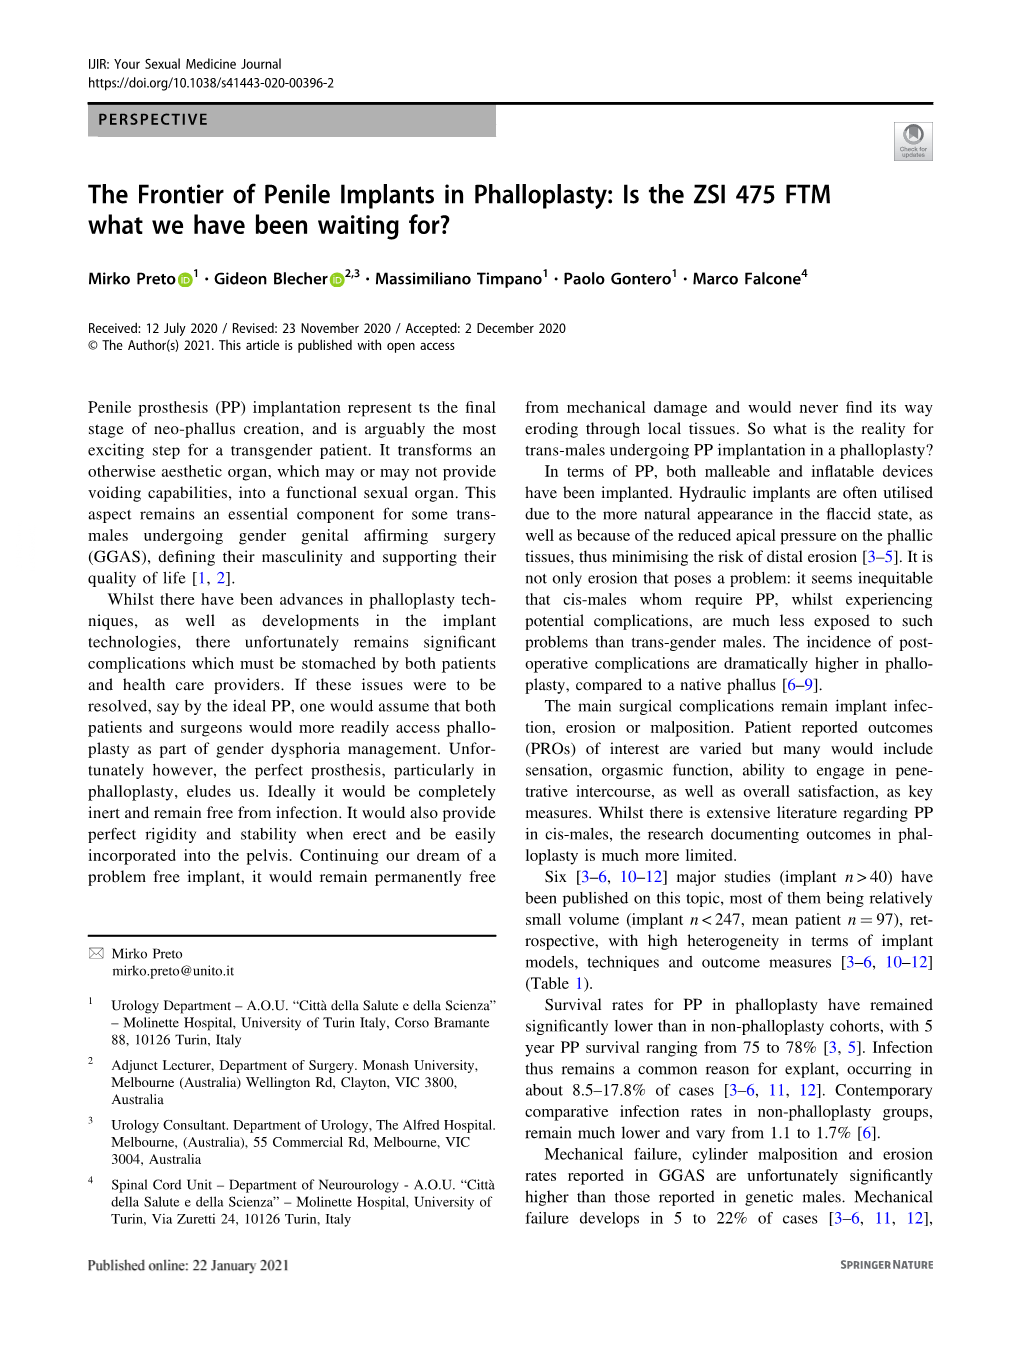 The Frontier of Penile Implants in Phalloplasty: Is the ZSI 475 FTM What We Have Been Waiting For?